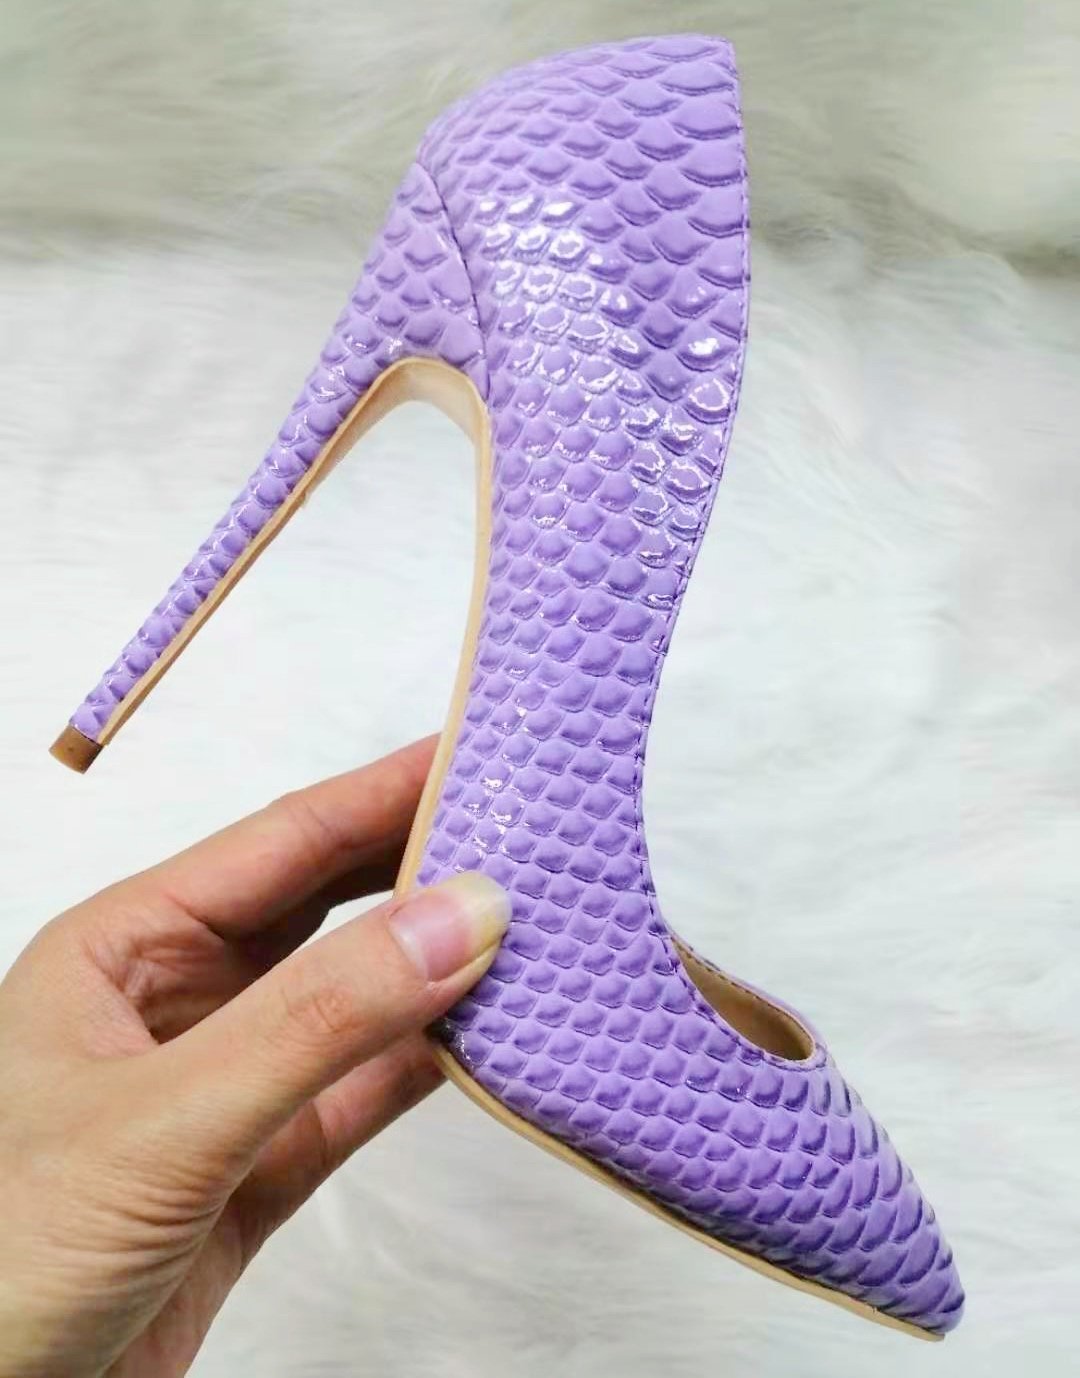 High-heels with snakeskin patterns, Fashion Evening Party Shoes, yy20-2